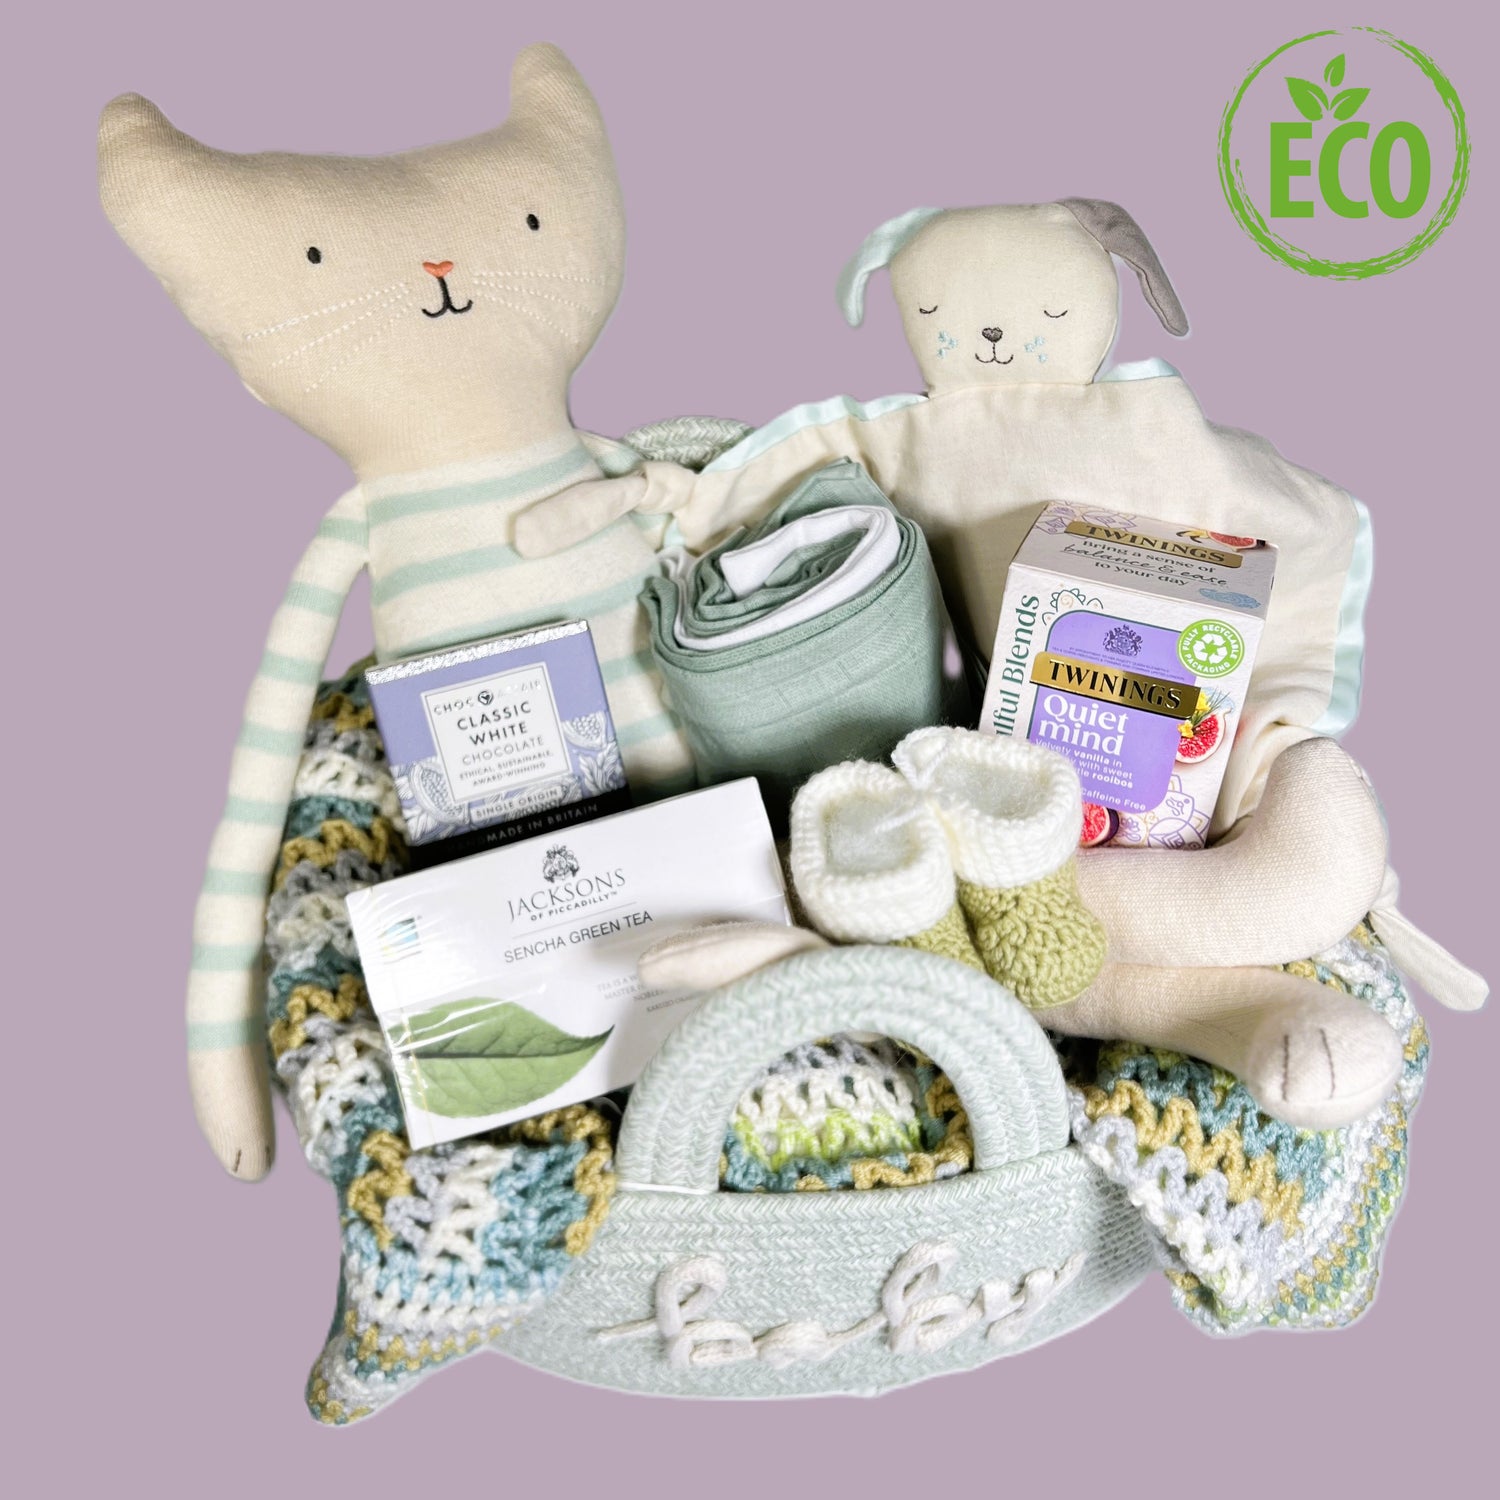 Unisex new baby gift basket full of eco freindly baby soft toys, tea,meriona wool baby booties, a hand crocheted baby blanket and a great rope storgae basket .